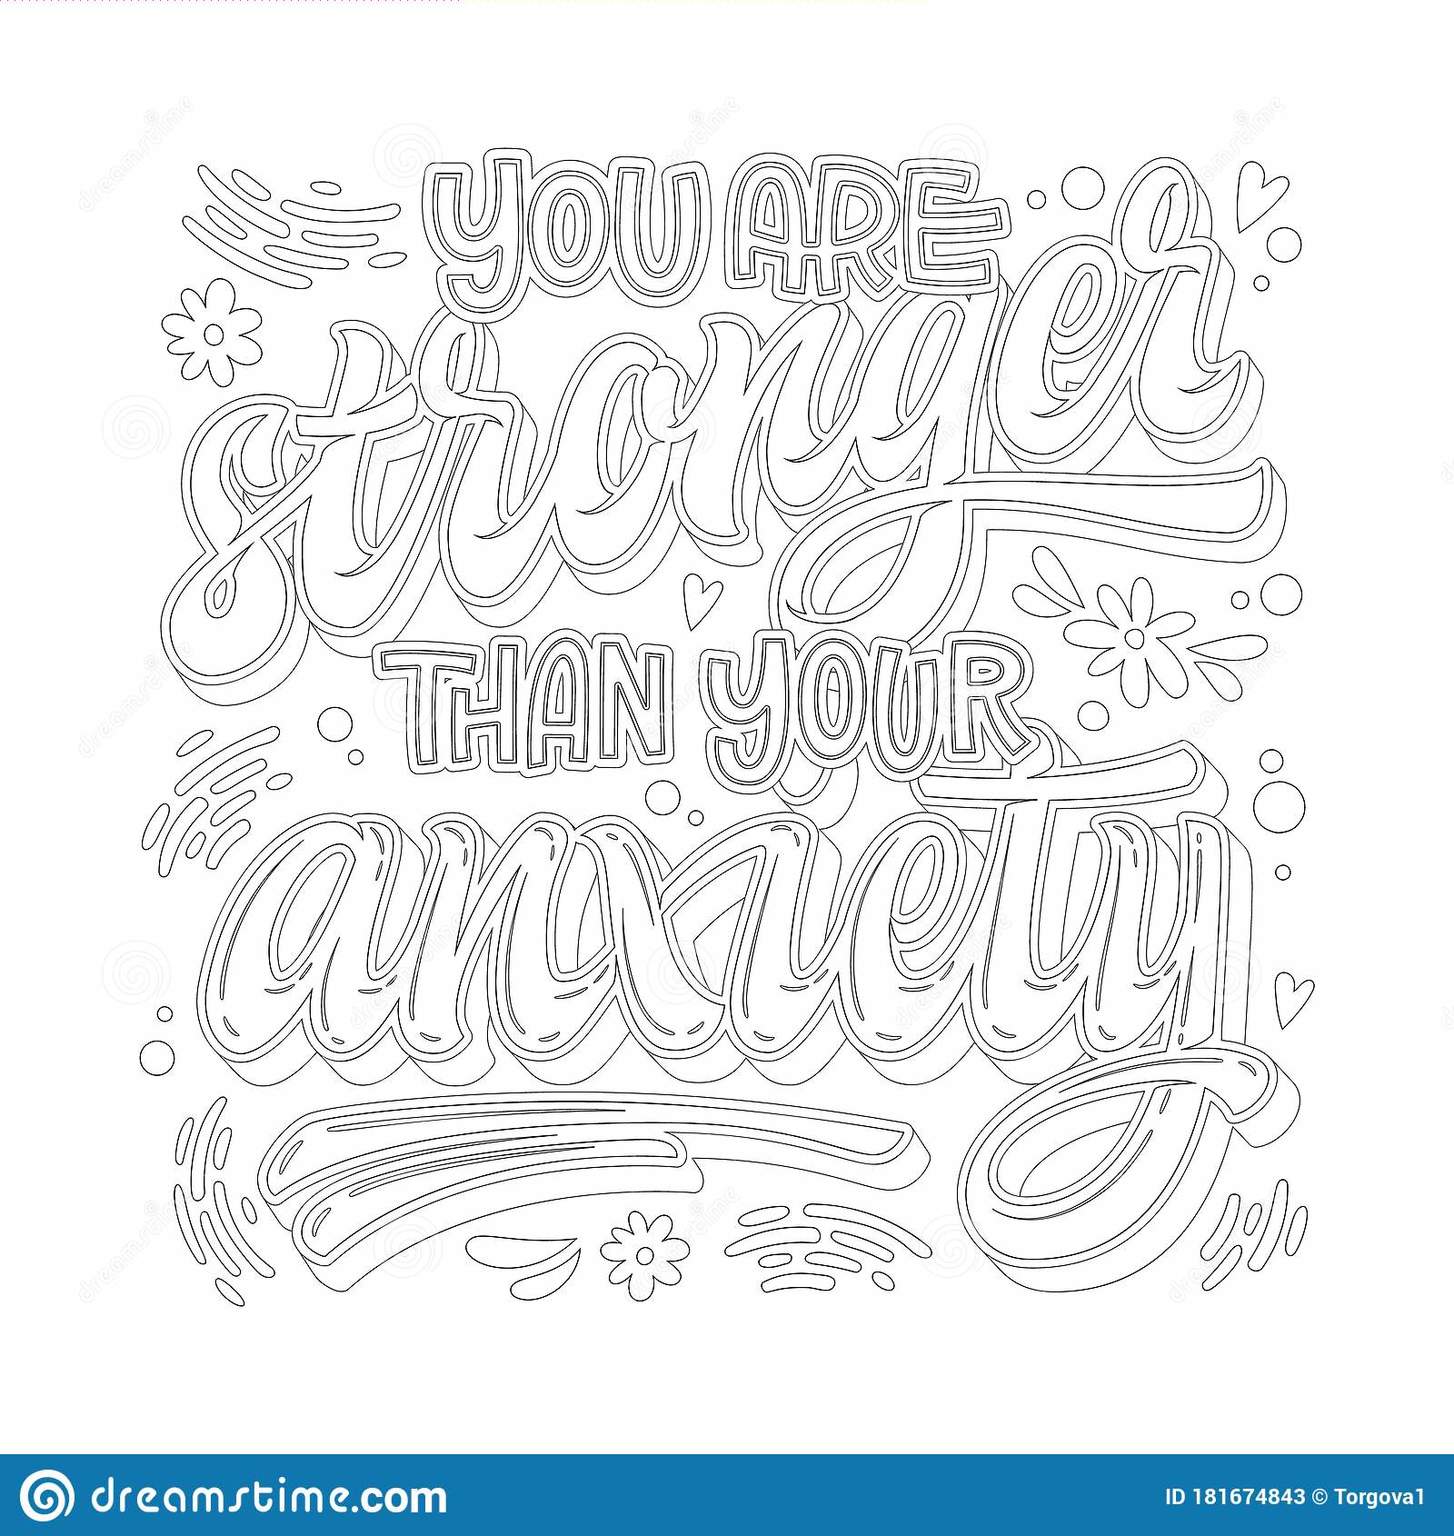 15 Printable Coloring Pages for Anxiety Reduction - Happier Human